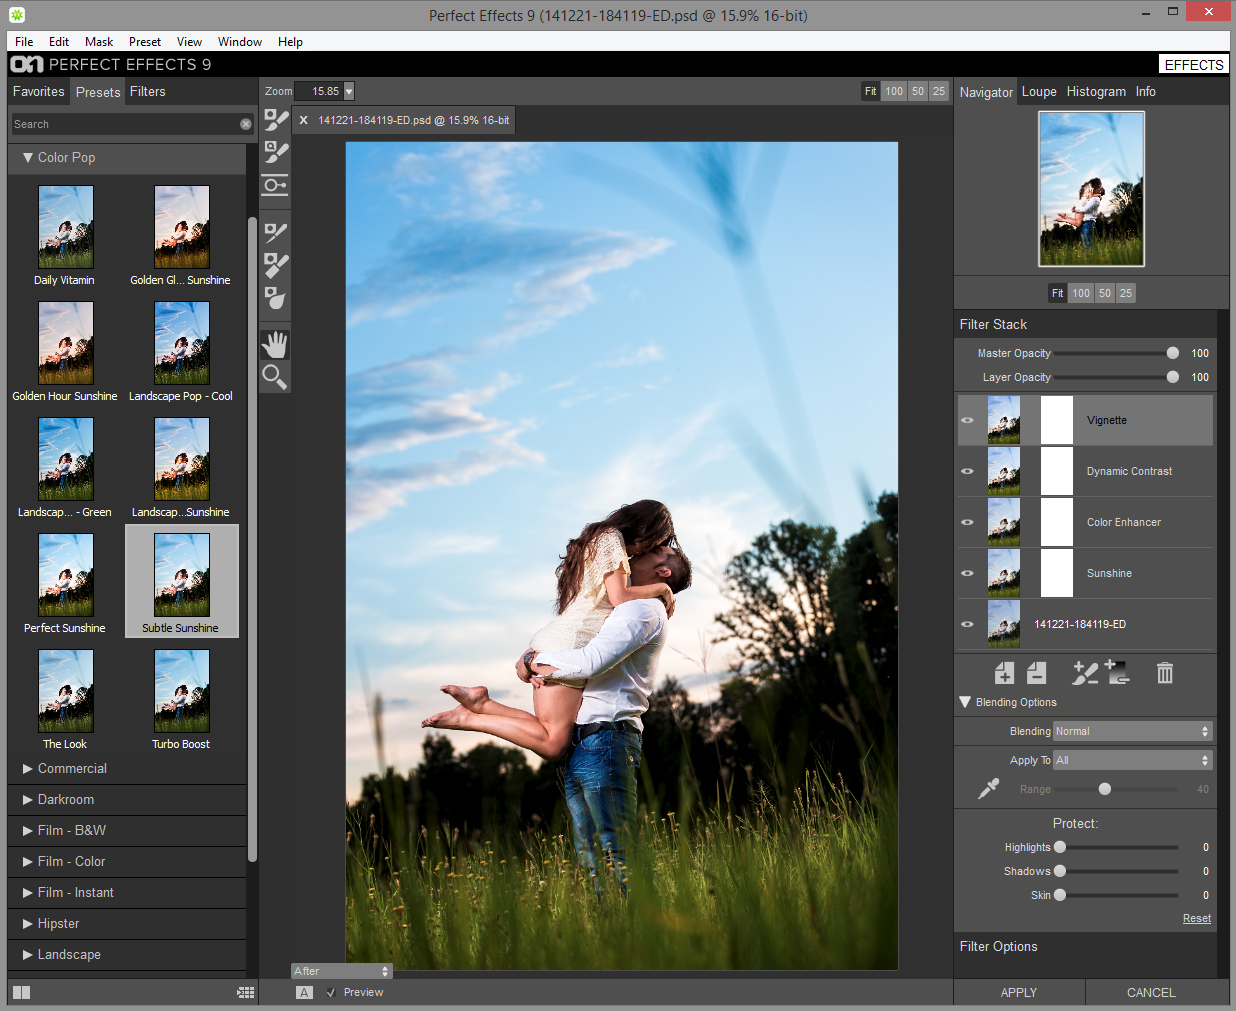 adobe photoshop 9 free download full version for windows xp